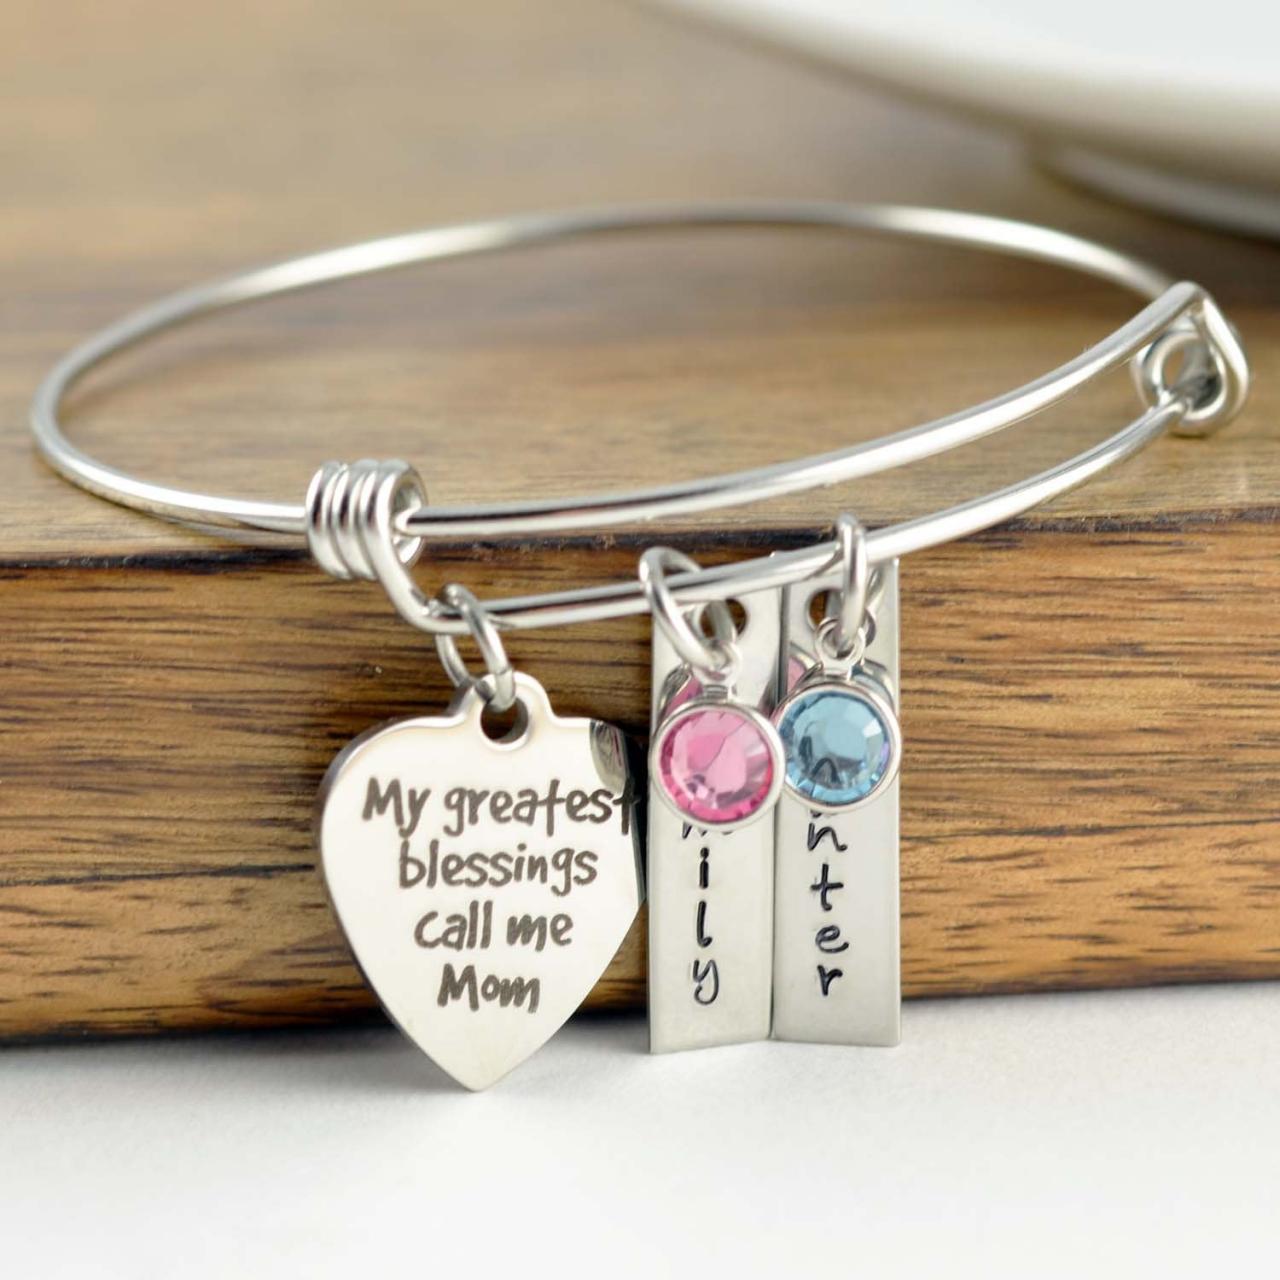 My Greatest Blessings, Personalized Mom Bracelet, Mothers Jewelry, Mothers Day Gift, Mothers Bracelet, Mom Jewelry, Gifts For Mom